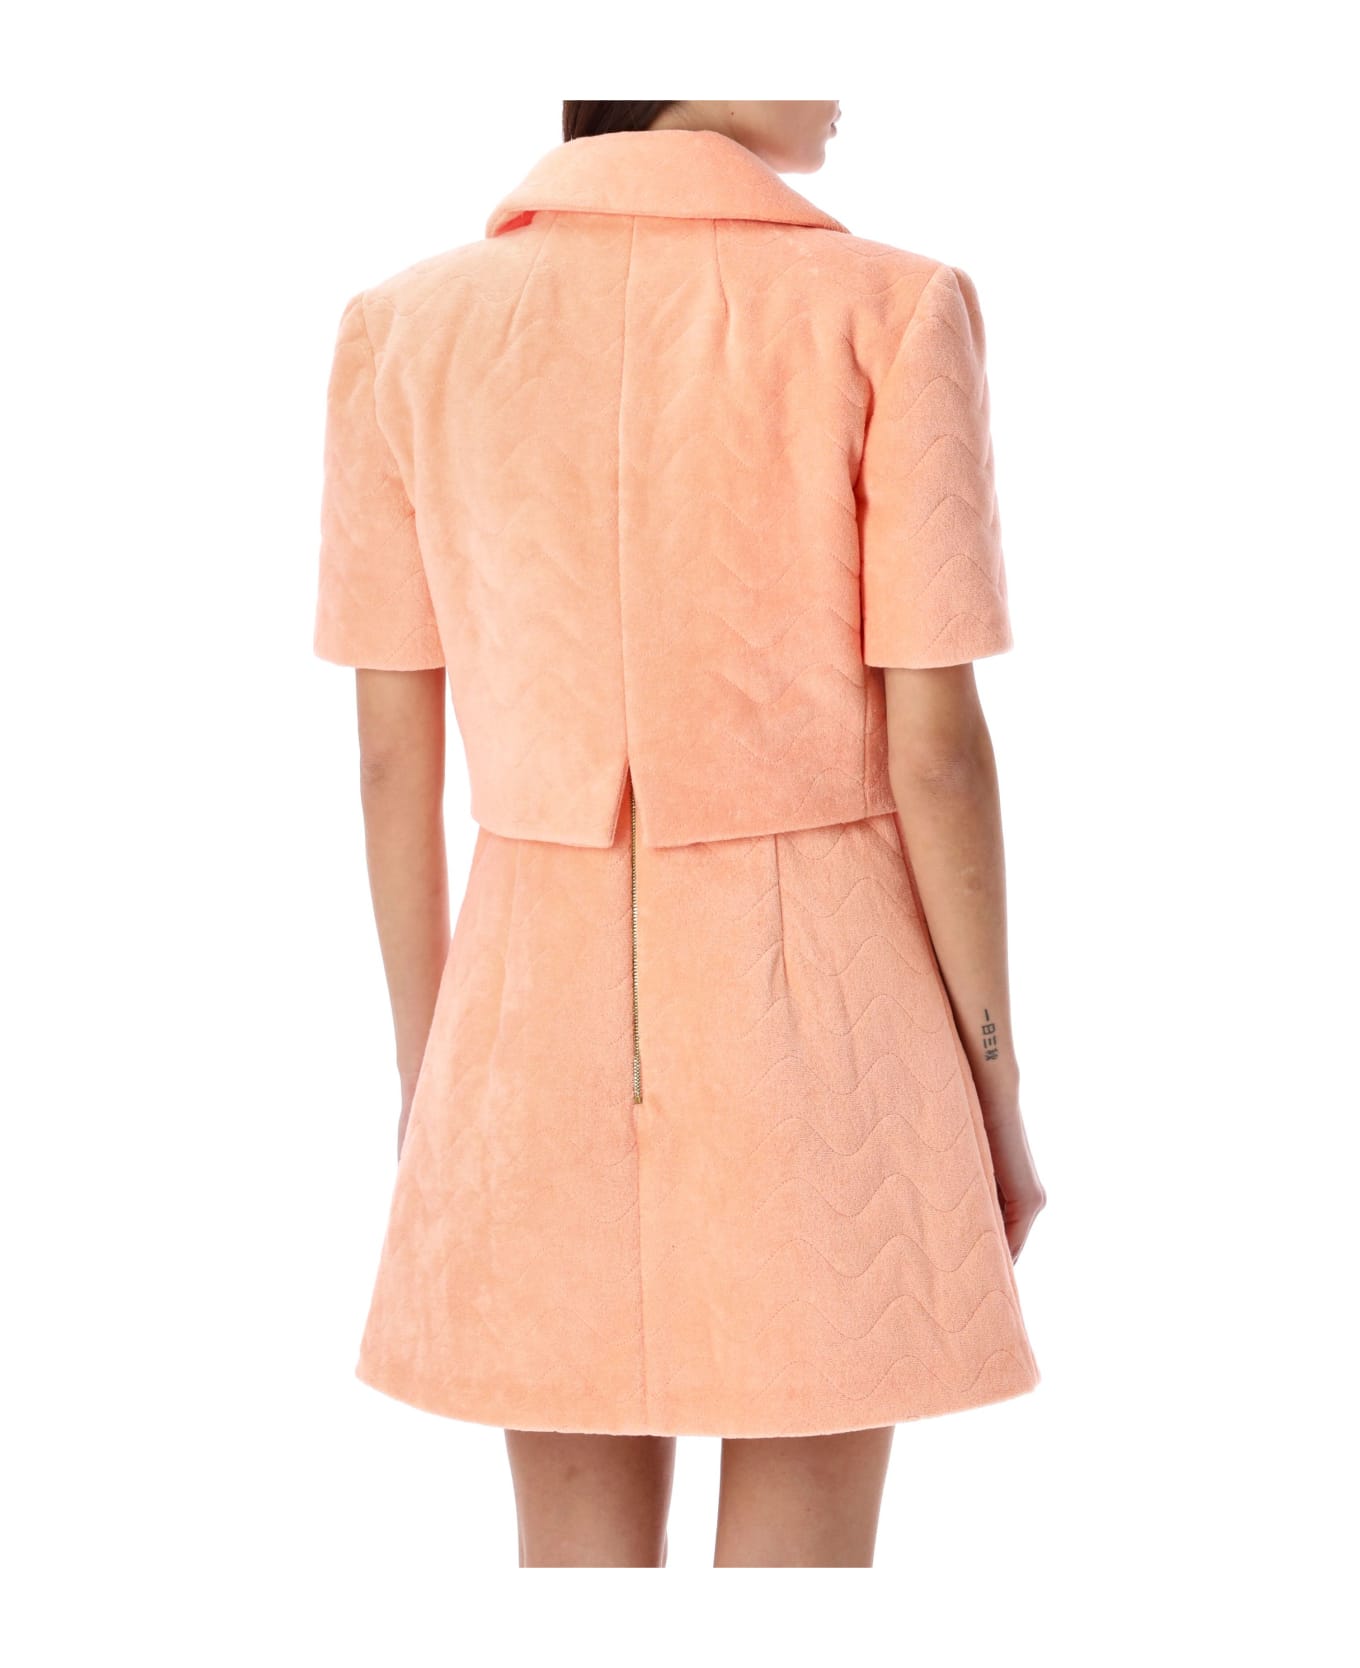 Patou Cropped Quilted Jacket - APRICOT ORANGE